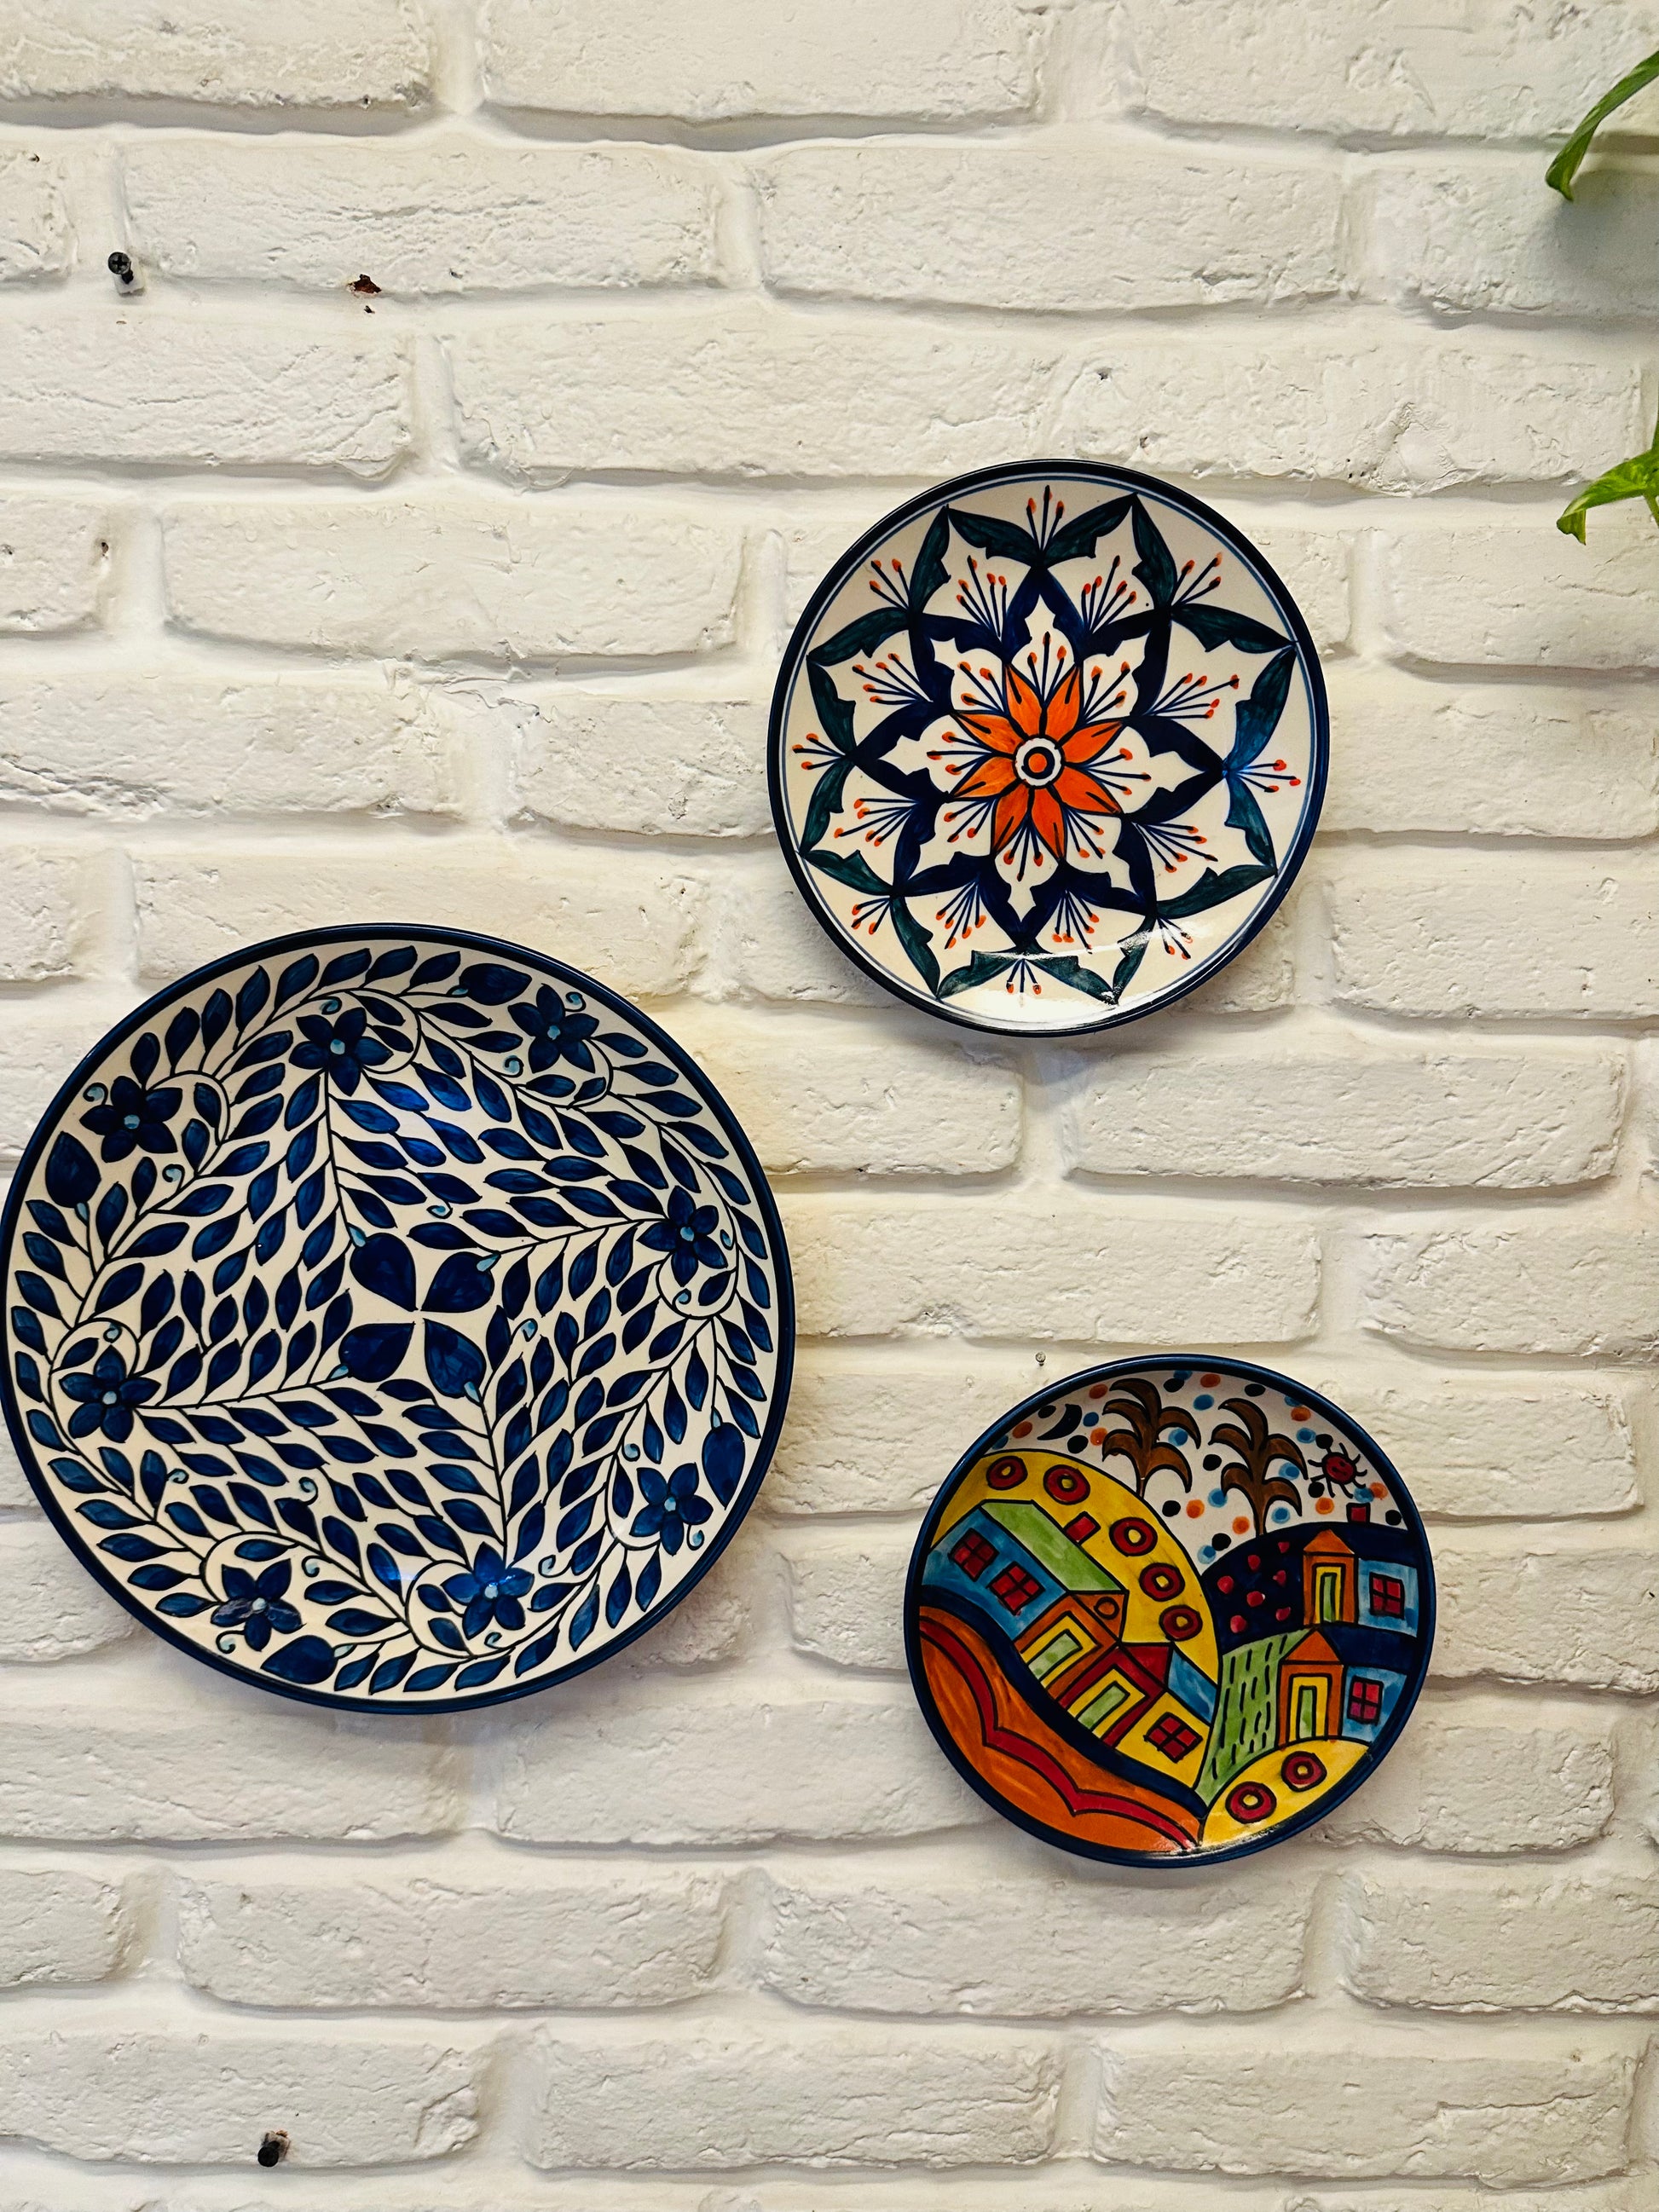  Artisanal Wall Plate Collection, Bedroom Wall Plate Ensemble, Classical Appeal Wall Décor, Classical Indian Wall Décor, Hand Painted Artisanal Plates, Handcrafted Home Accents, Handcrafted Indian Artisans, Indian Artisan Wall Décor, Marigold Hand Painted Wall Plates, Small Batch High-Quality Décor, Unique Handcrafted Wall Plates, Unique Living Room Décor, Vibrant Marigold Wall Art, Vibrant Wall Accent Pieces, Wall Hanging Hook Included, tesu